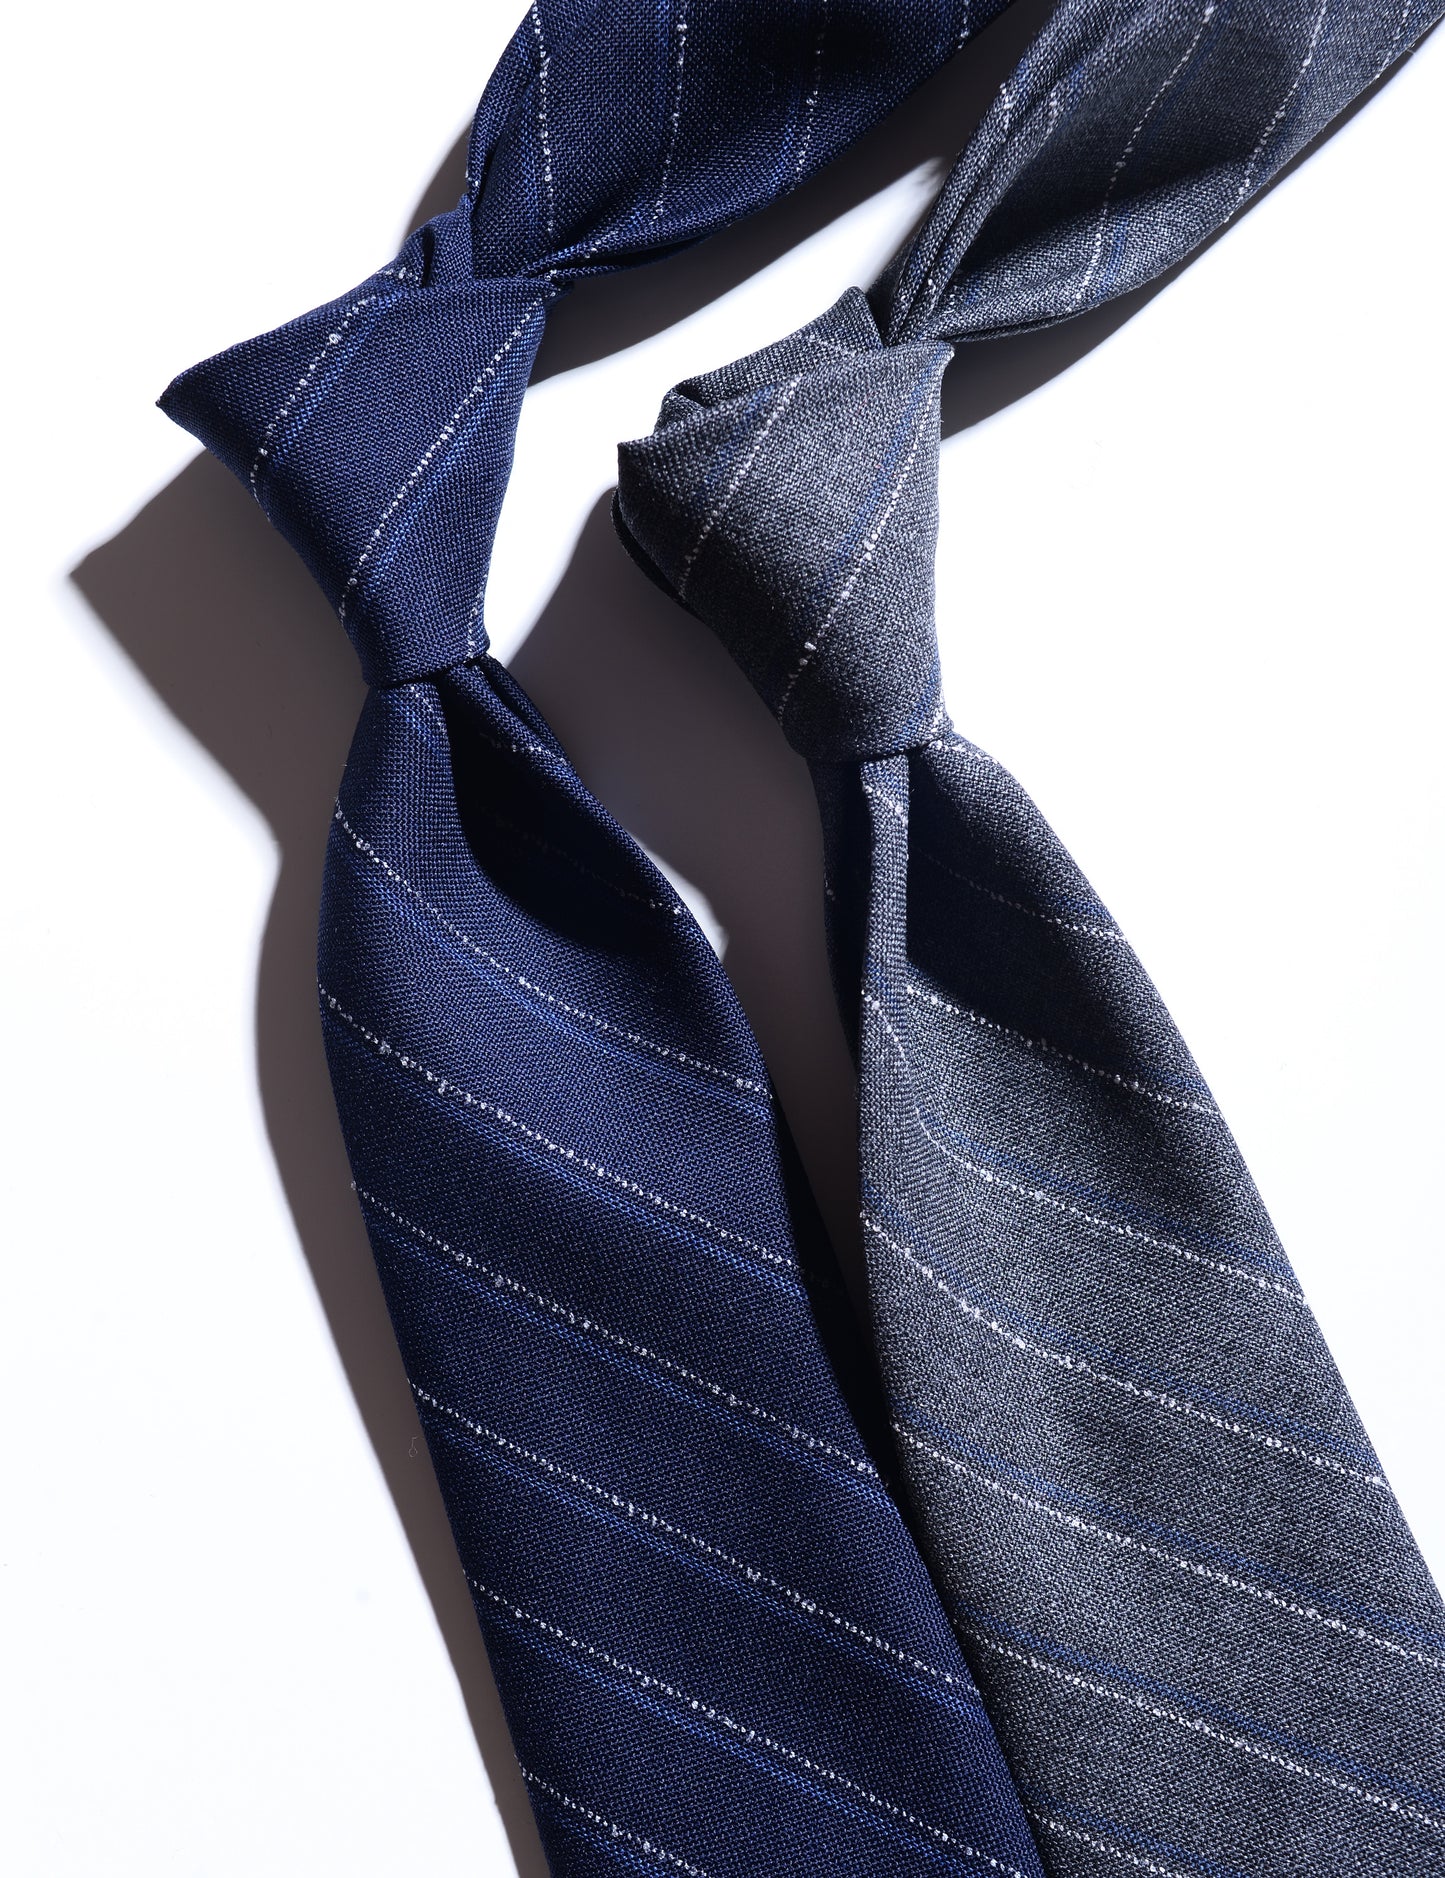 Detail of Untipped Mid-gray with Blue and White Chalkstripe Tie showing fabric texture and pattern